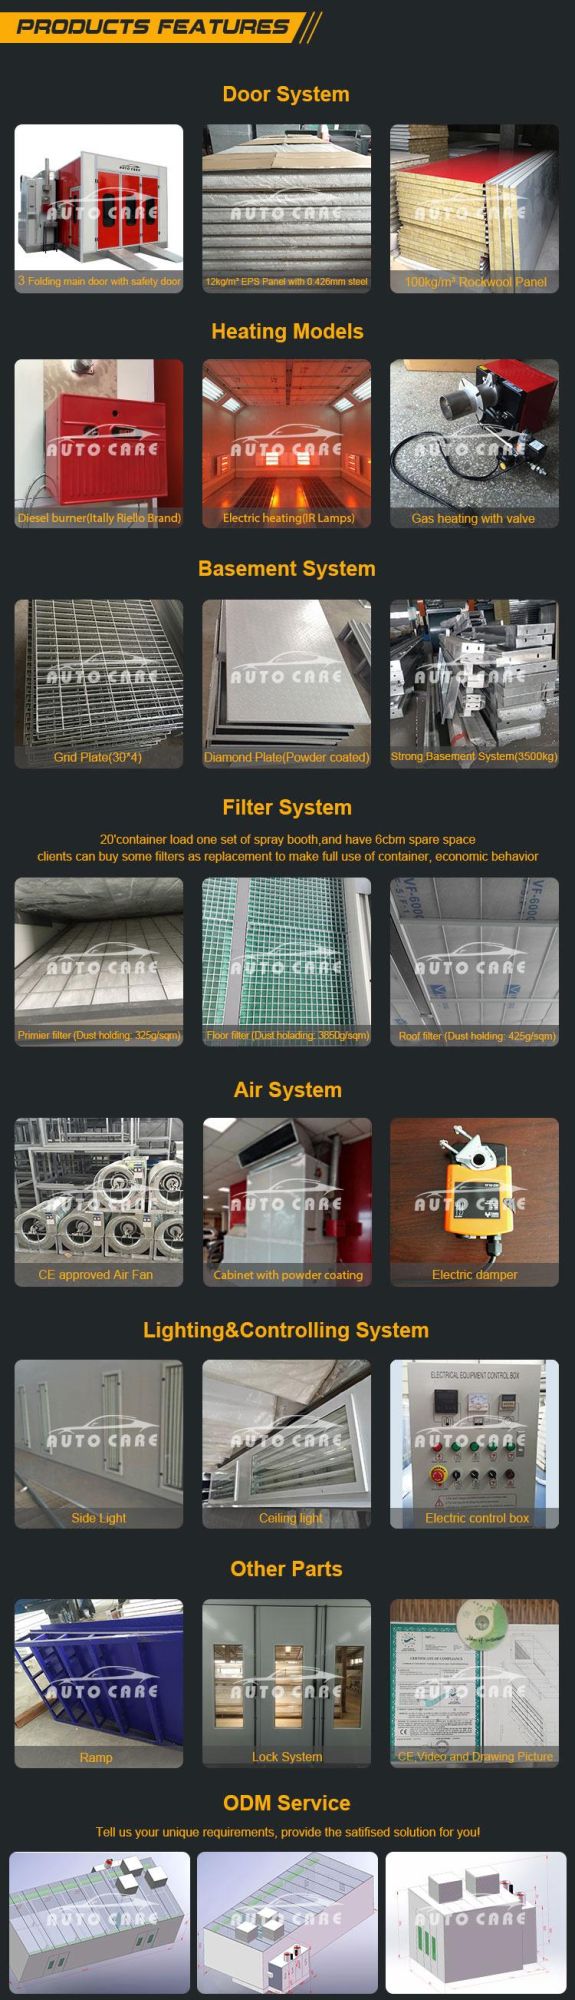 Factory Ce Standard High Quality Car Painting Spray Booth Room Oven